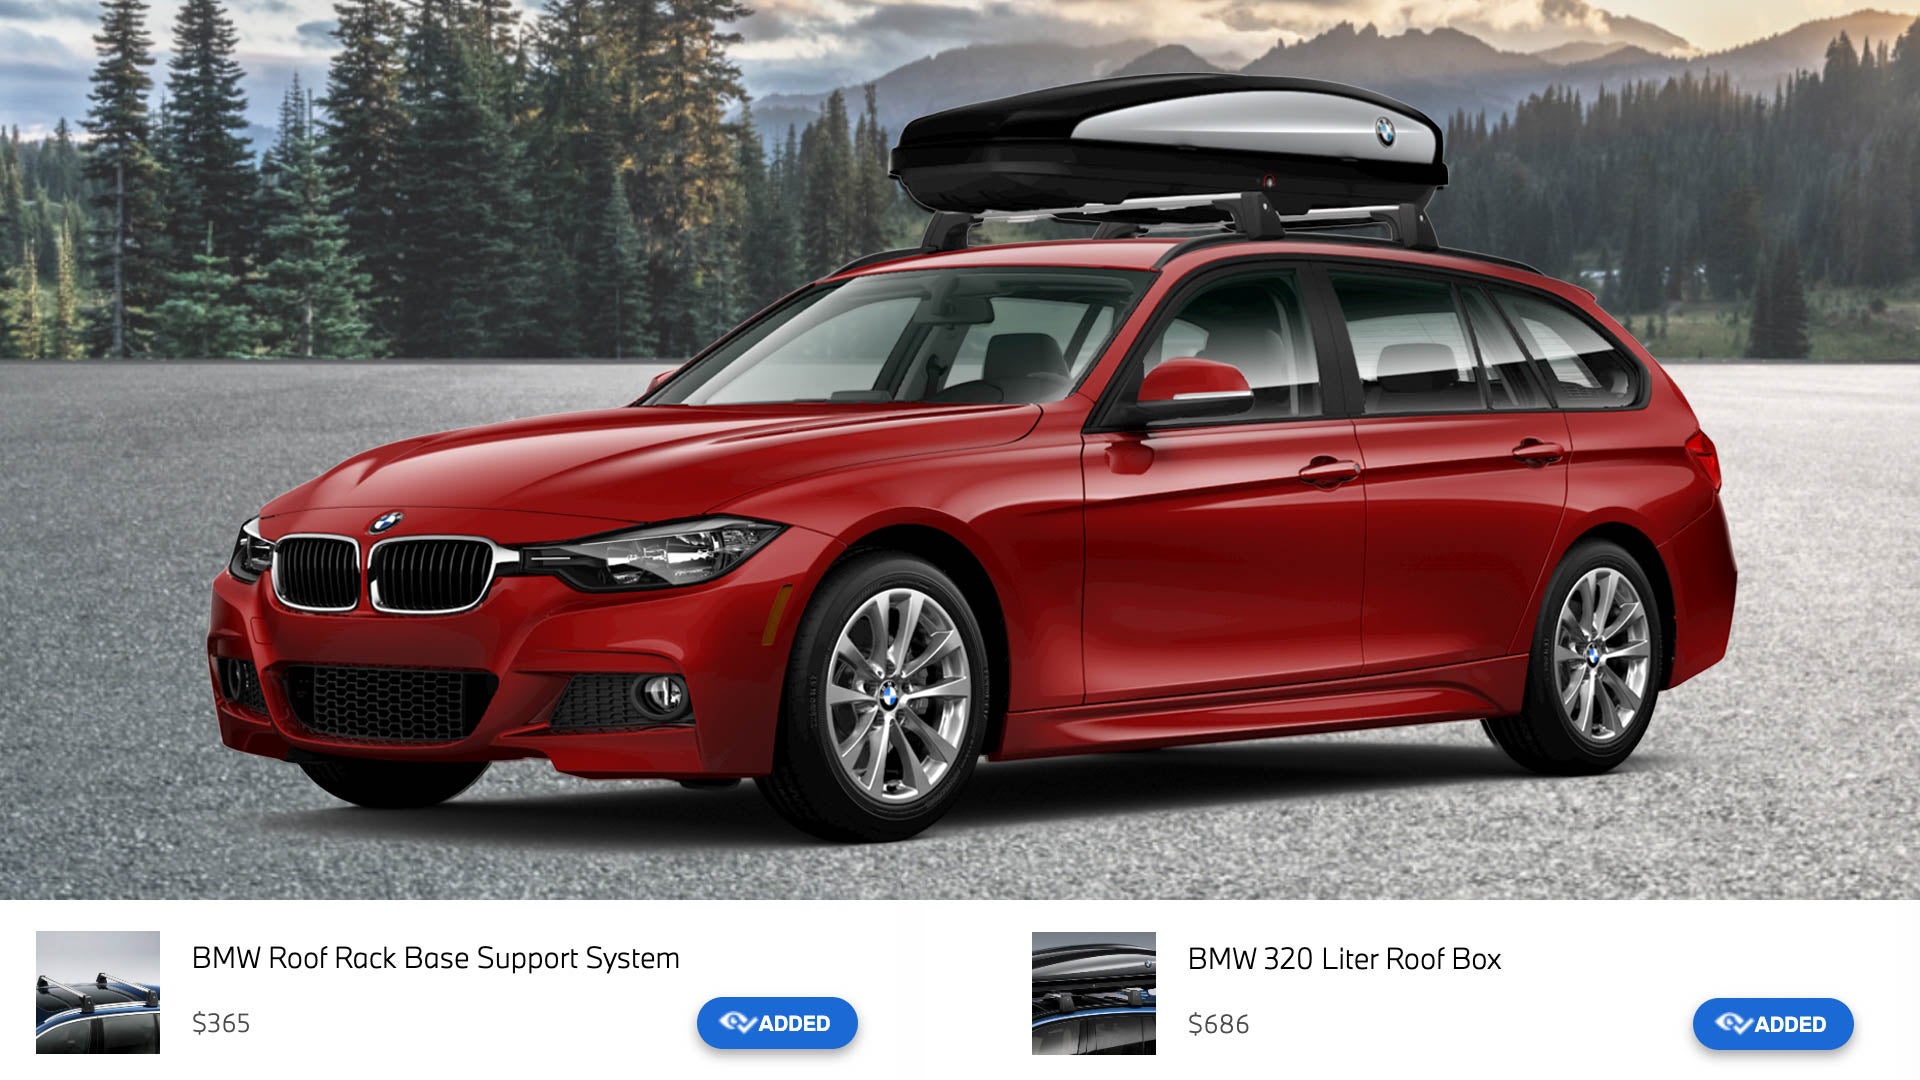 BMW is very impressive for including vintage cars in their accessory configurator.